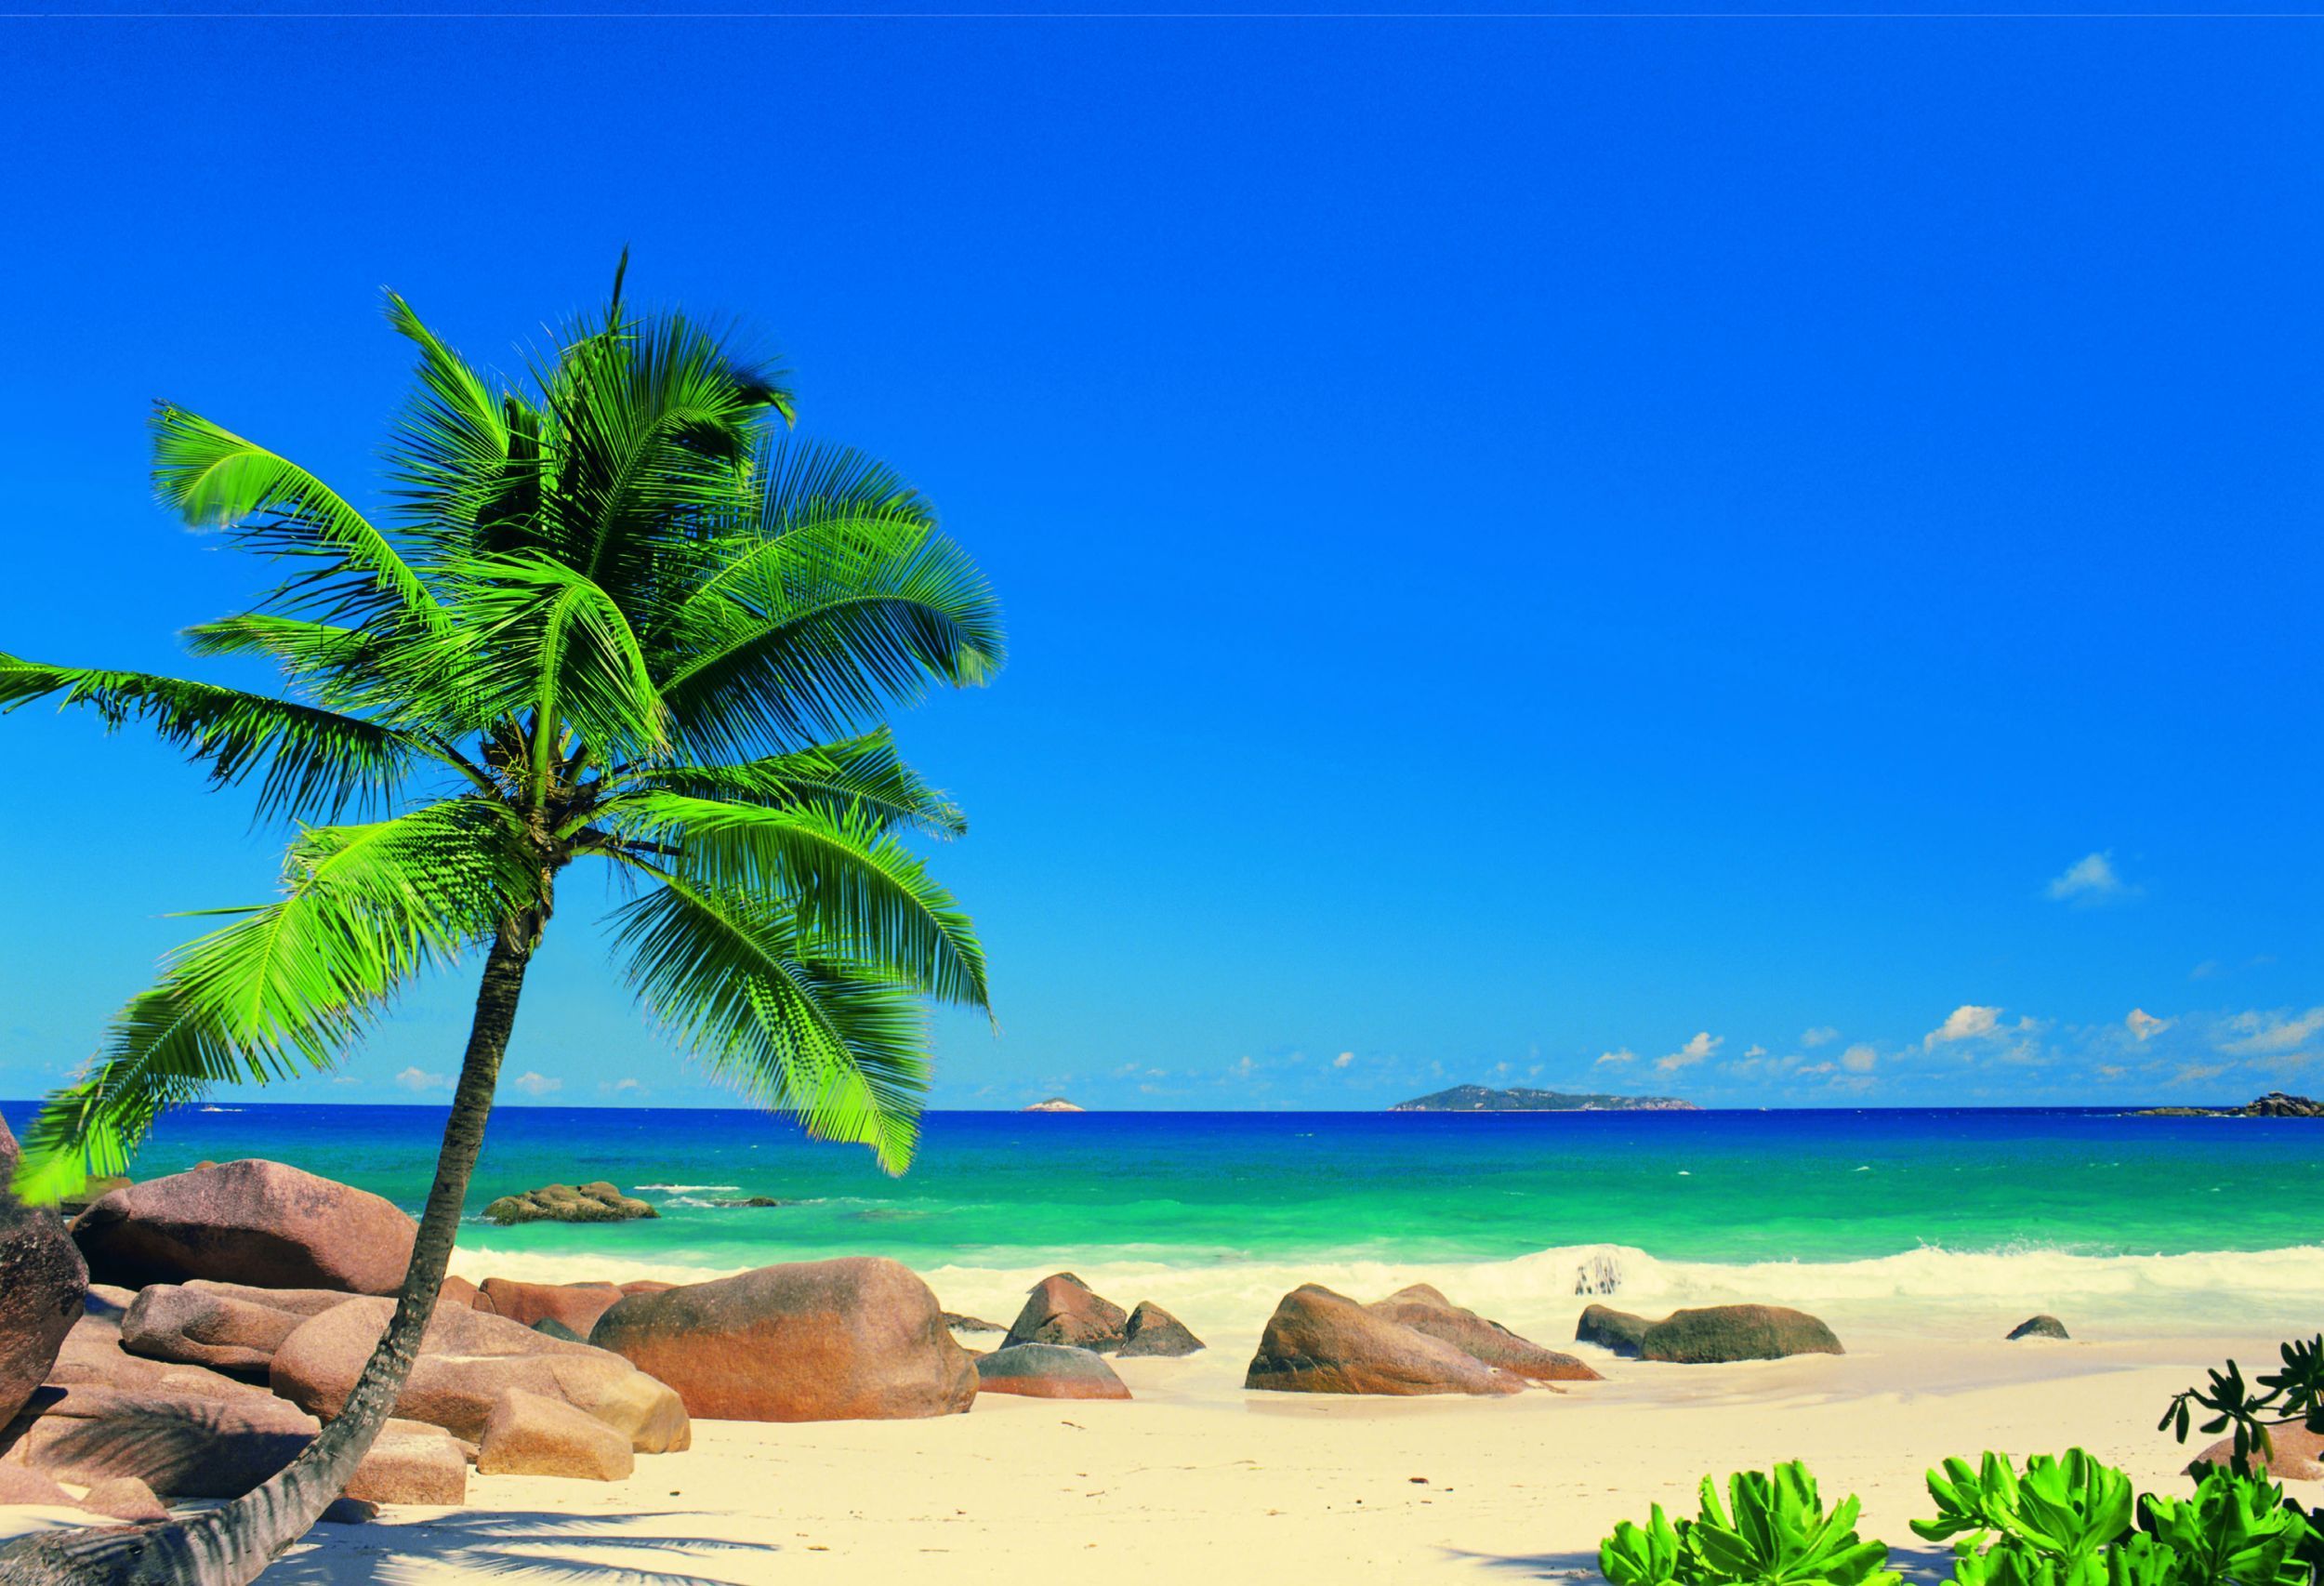 Wallpapers Beach Awesome Caribbean Wallpaper